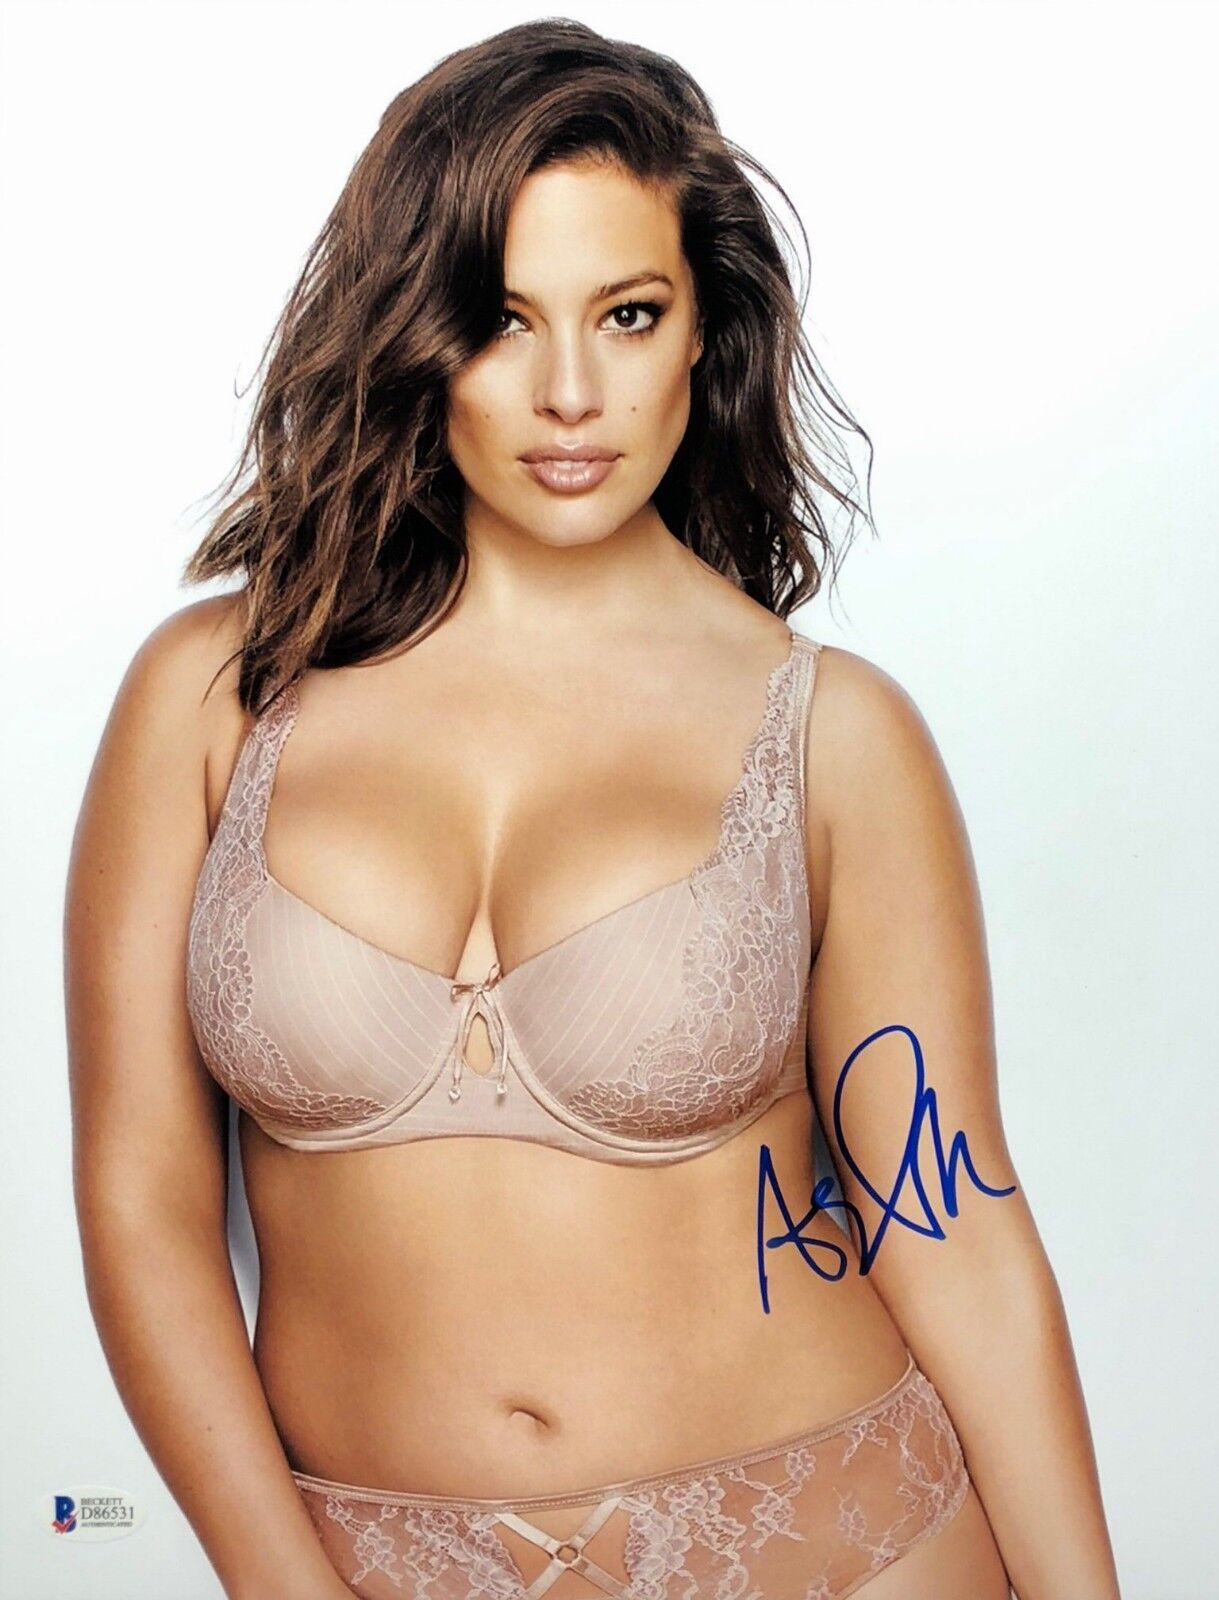 Ashley Graham Signed 11x14 Photo Poster painting *Model Beckett BAS D86531